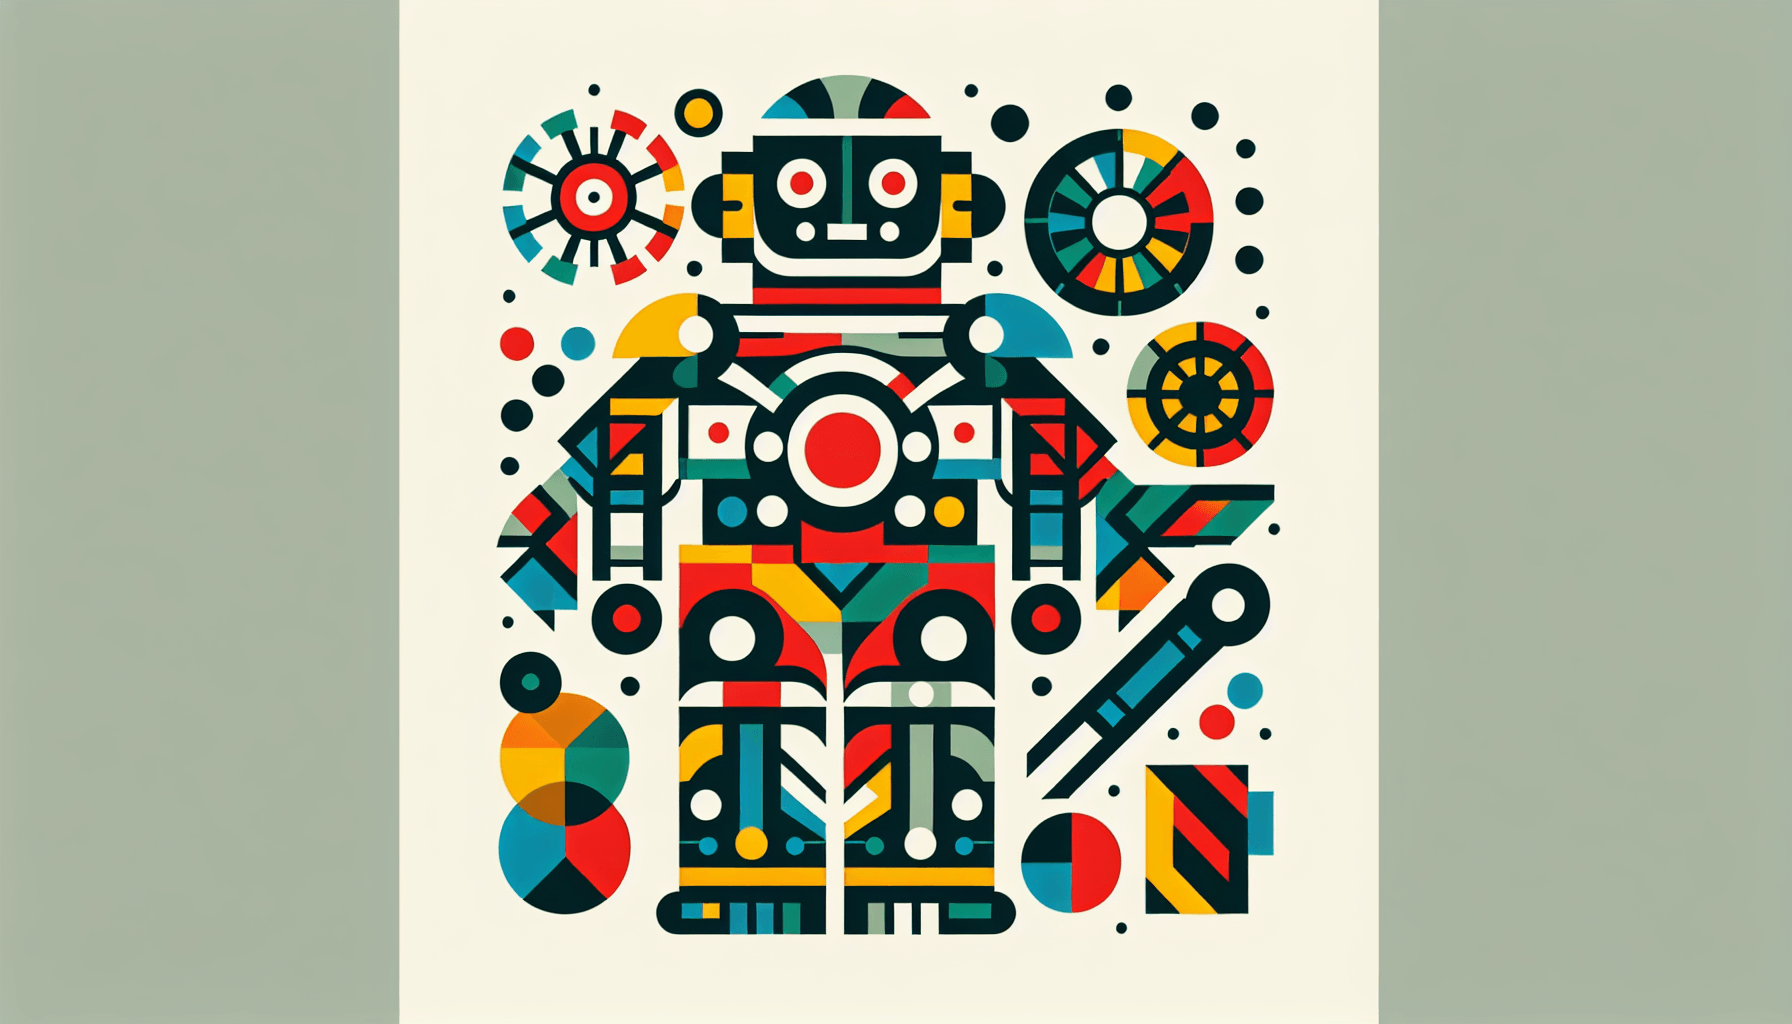 Robot in flat illustration style and white background, red #f47574, green #88c7a8, yellow #fcc44b, and blue #645bc8 colors.